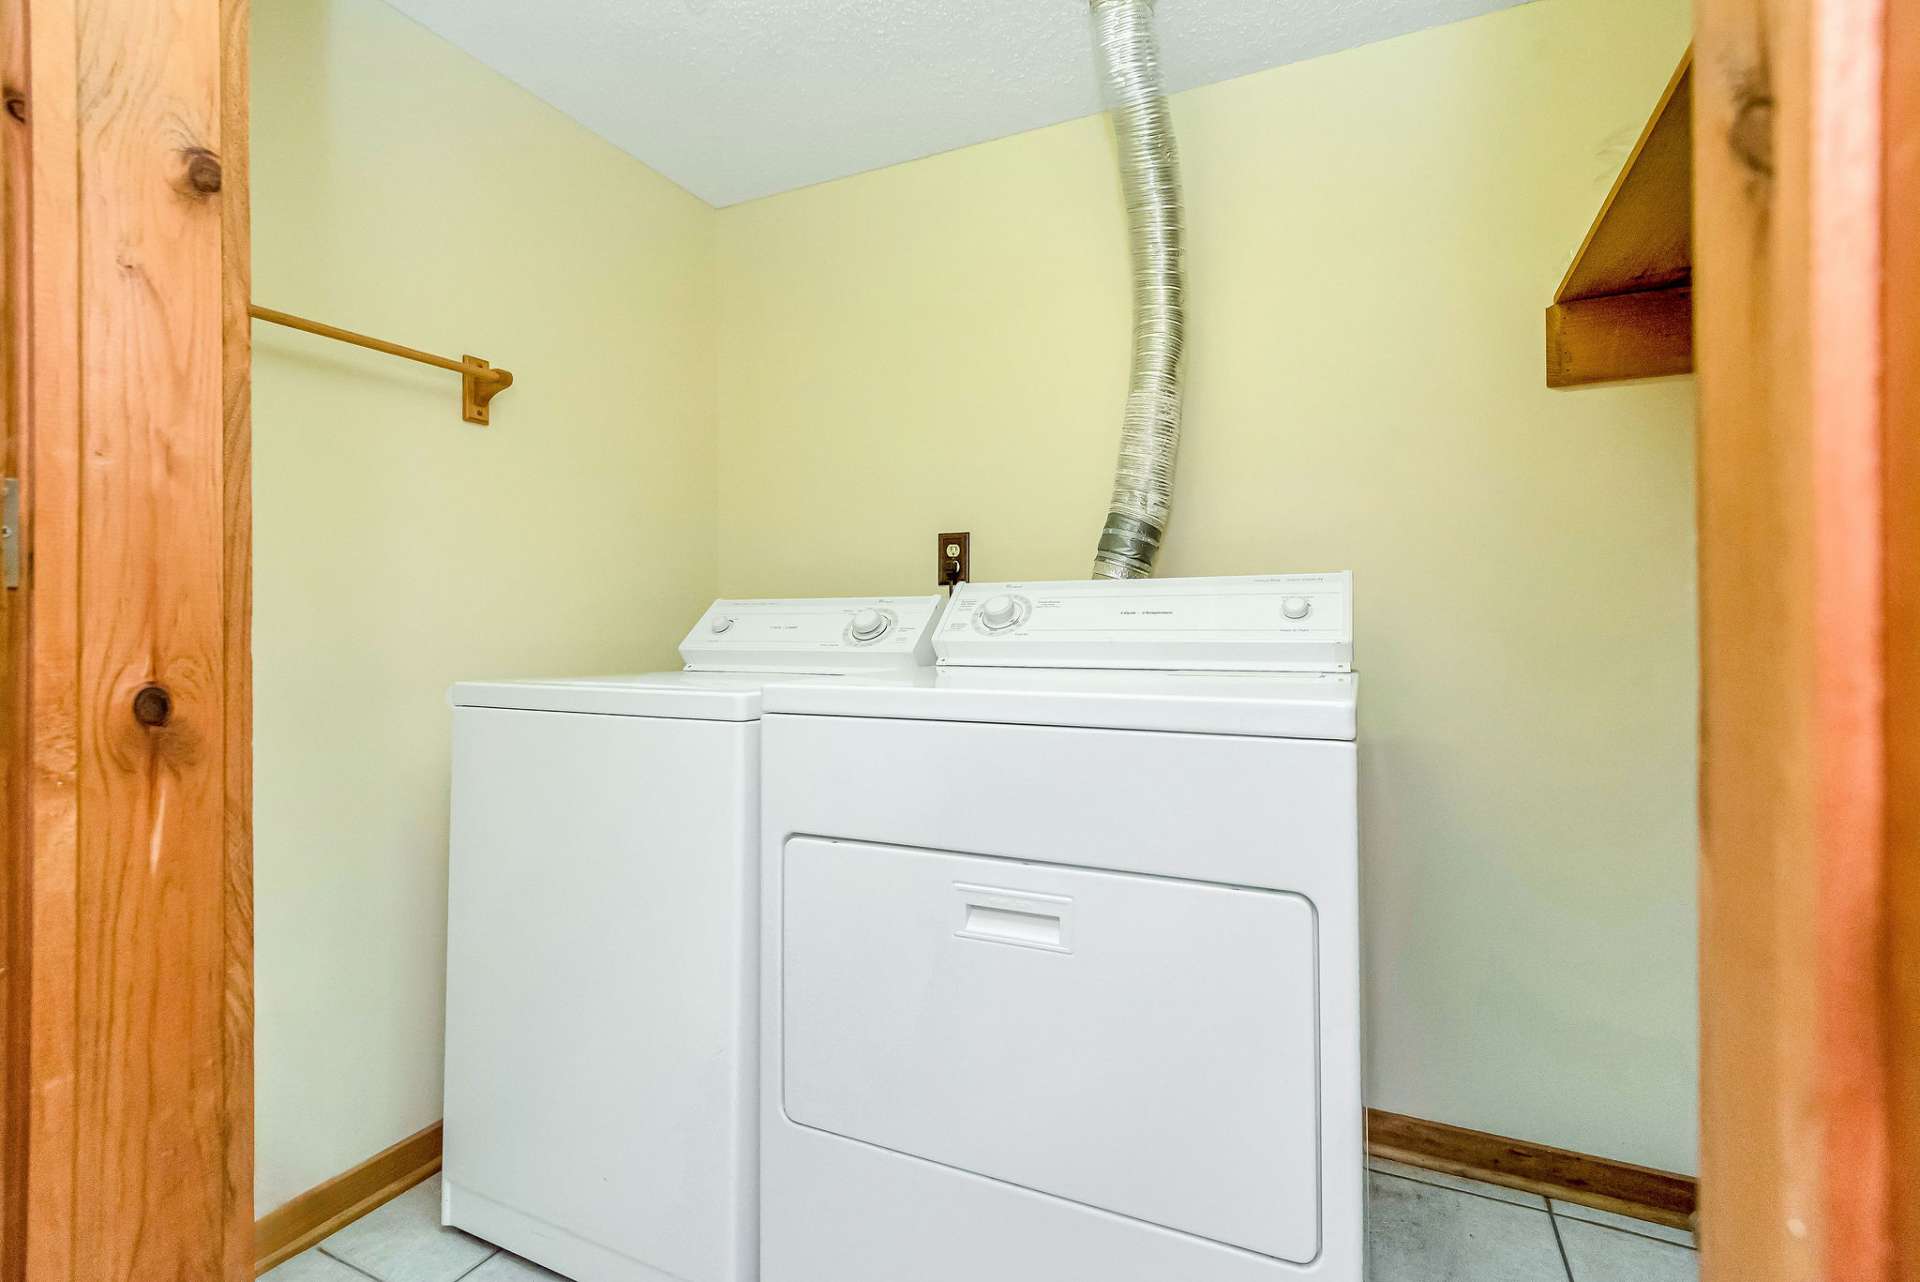 There is extra storage available in the laundry closet.